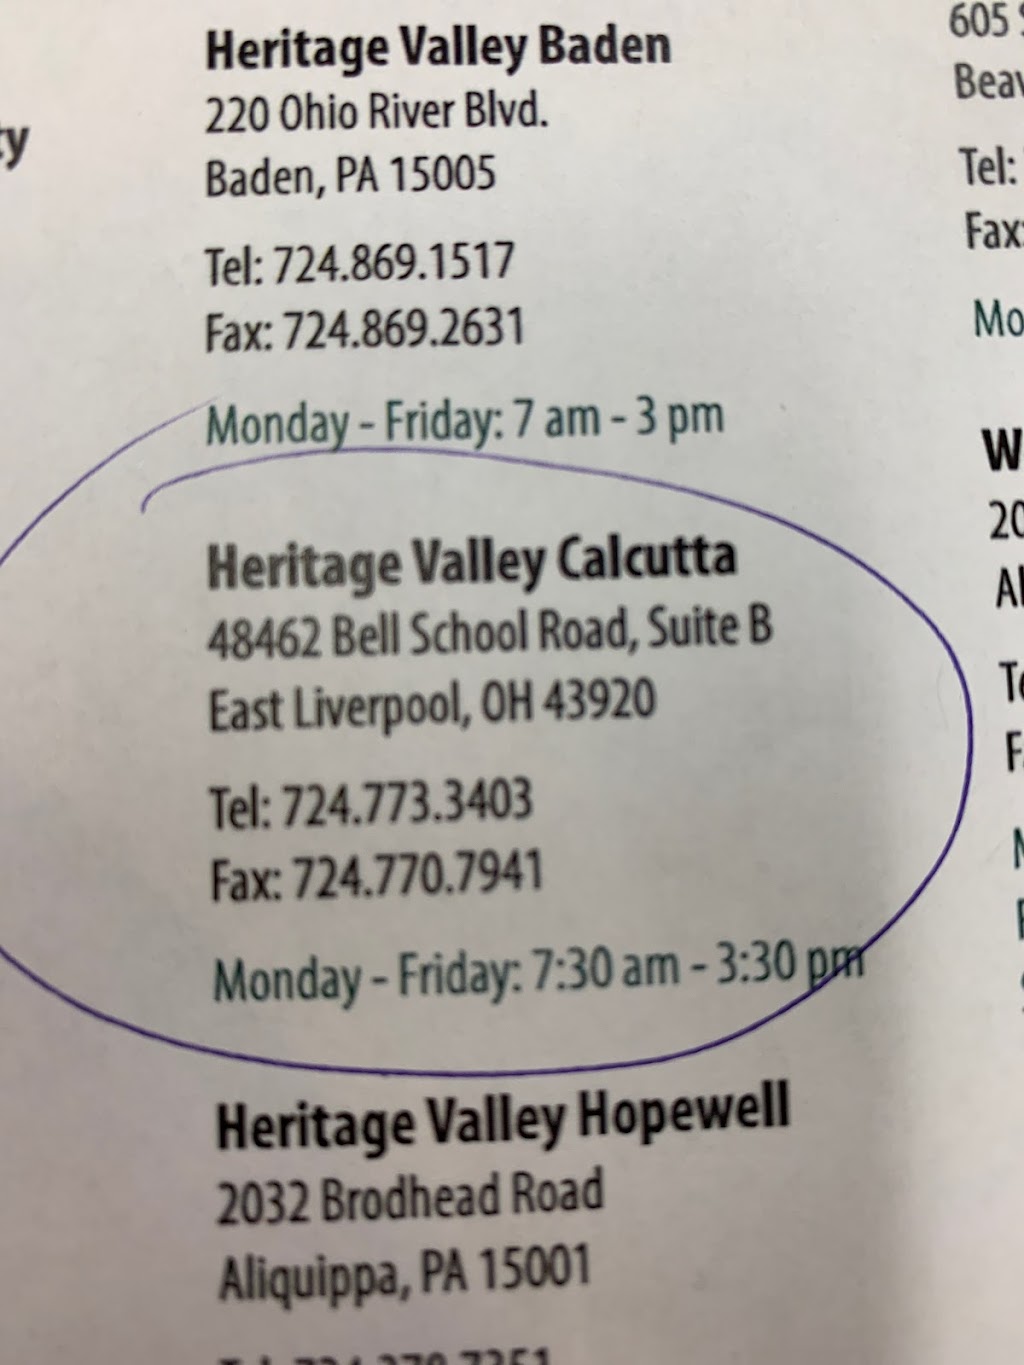 Heritage Valley Calcutta Imaging & Lab | 48462 Bell School Rd # B, East Liverpool, OH 43920, USA | Phone: (724) 773-3403